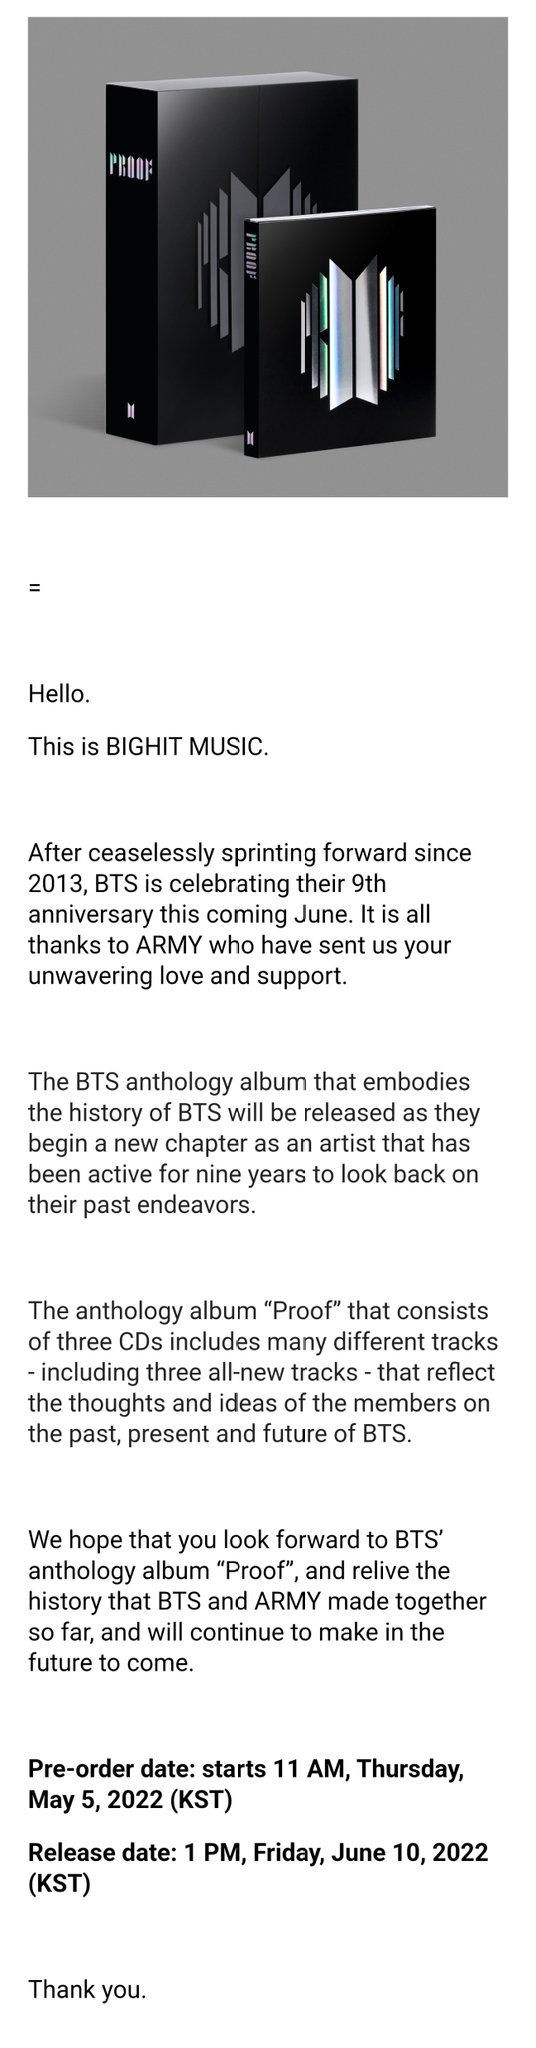 BTS - Albums, Songs, and News